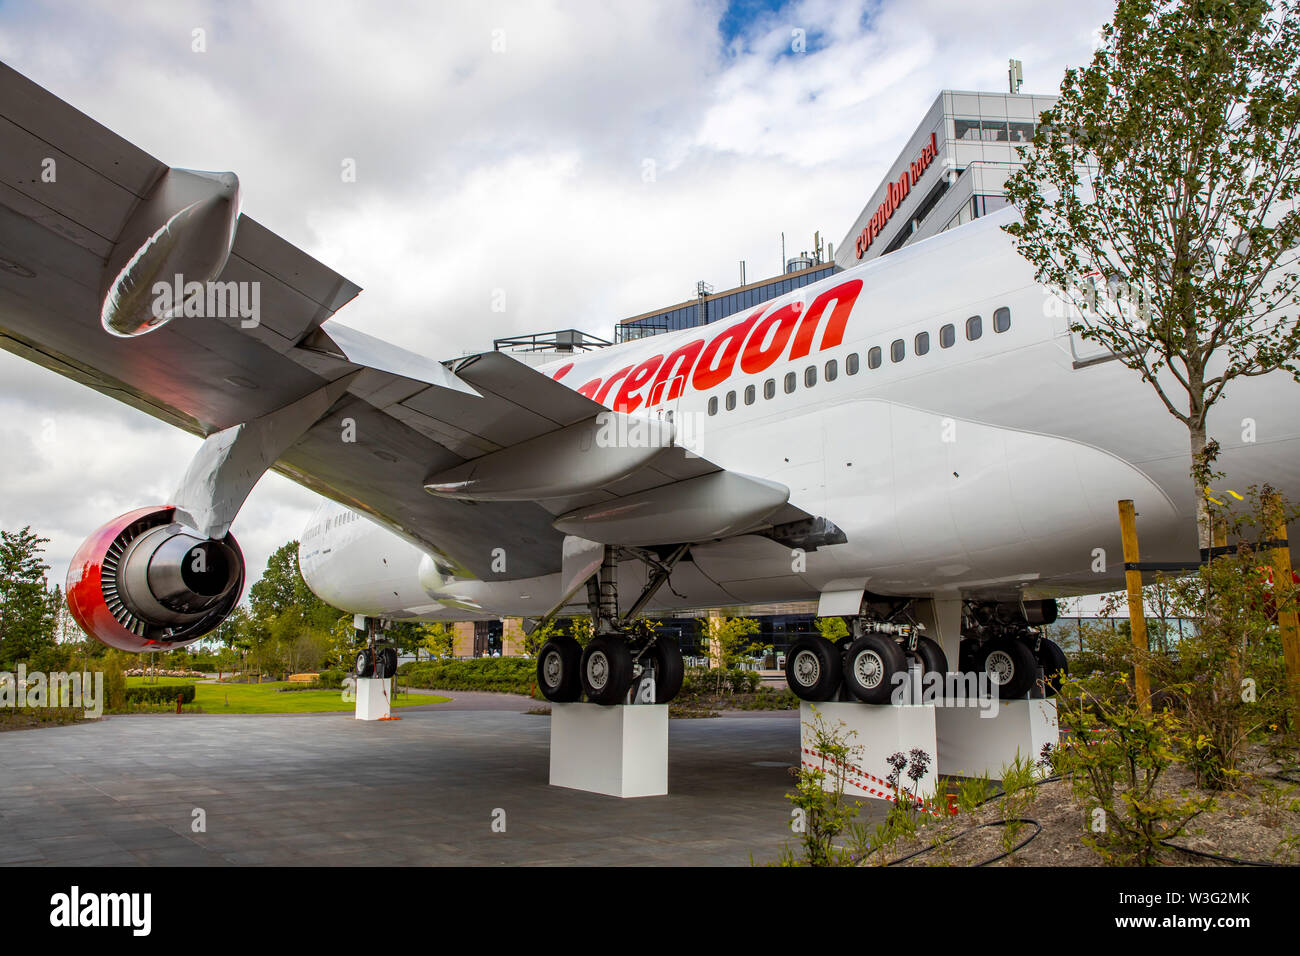 Corendon Village Hotels, at Amsterdam Schiphol Airport, former KLM Boeing 747-400, Jumbo Jet, in the park of the hotel complex, will be converted into Stock Photo